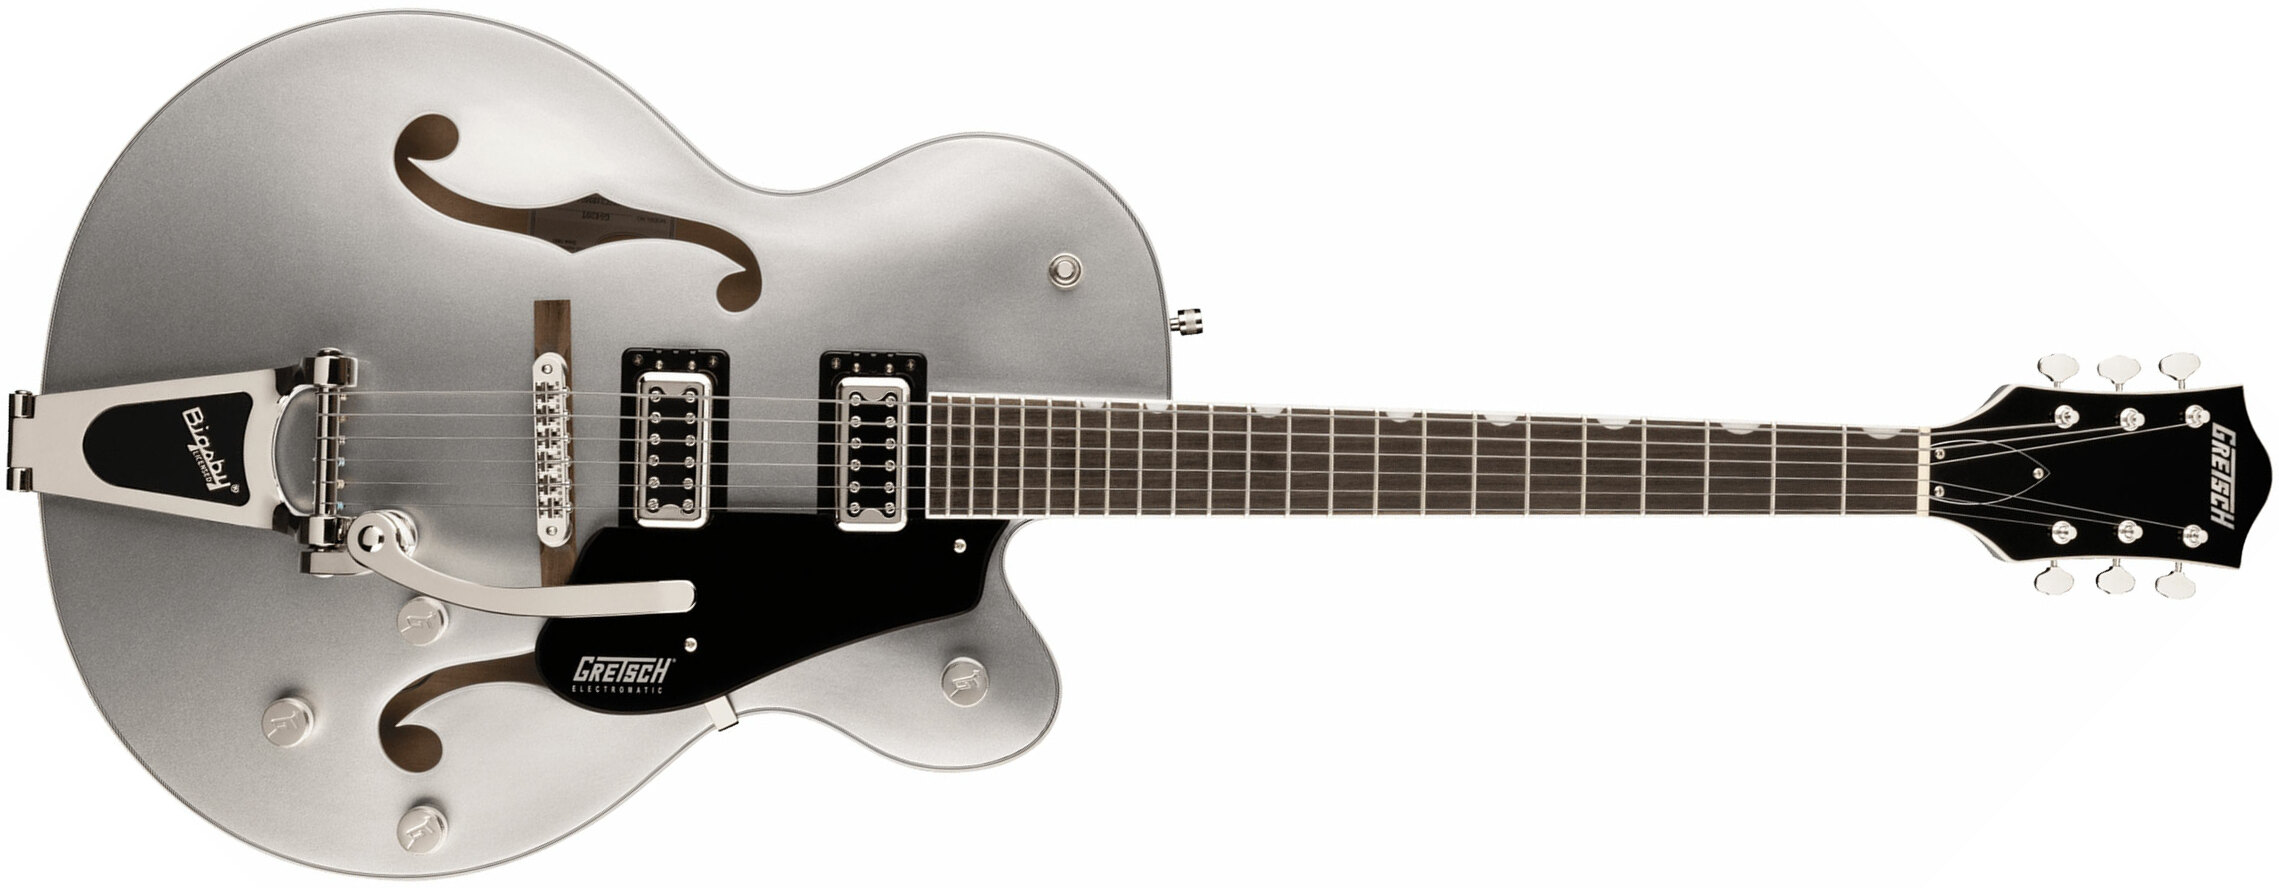 Gretsch G5420t Classic Electromatic Hollow Body Hh Trem Bigsby Lau - Airline Silver - Semi-hollow electric guitar - Main picture